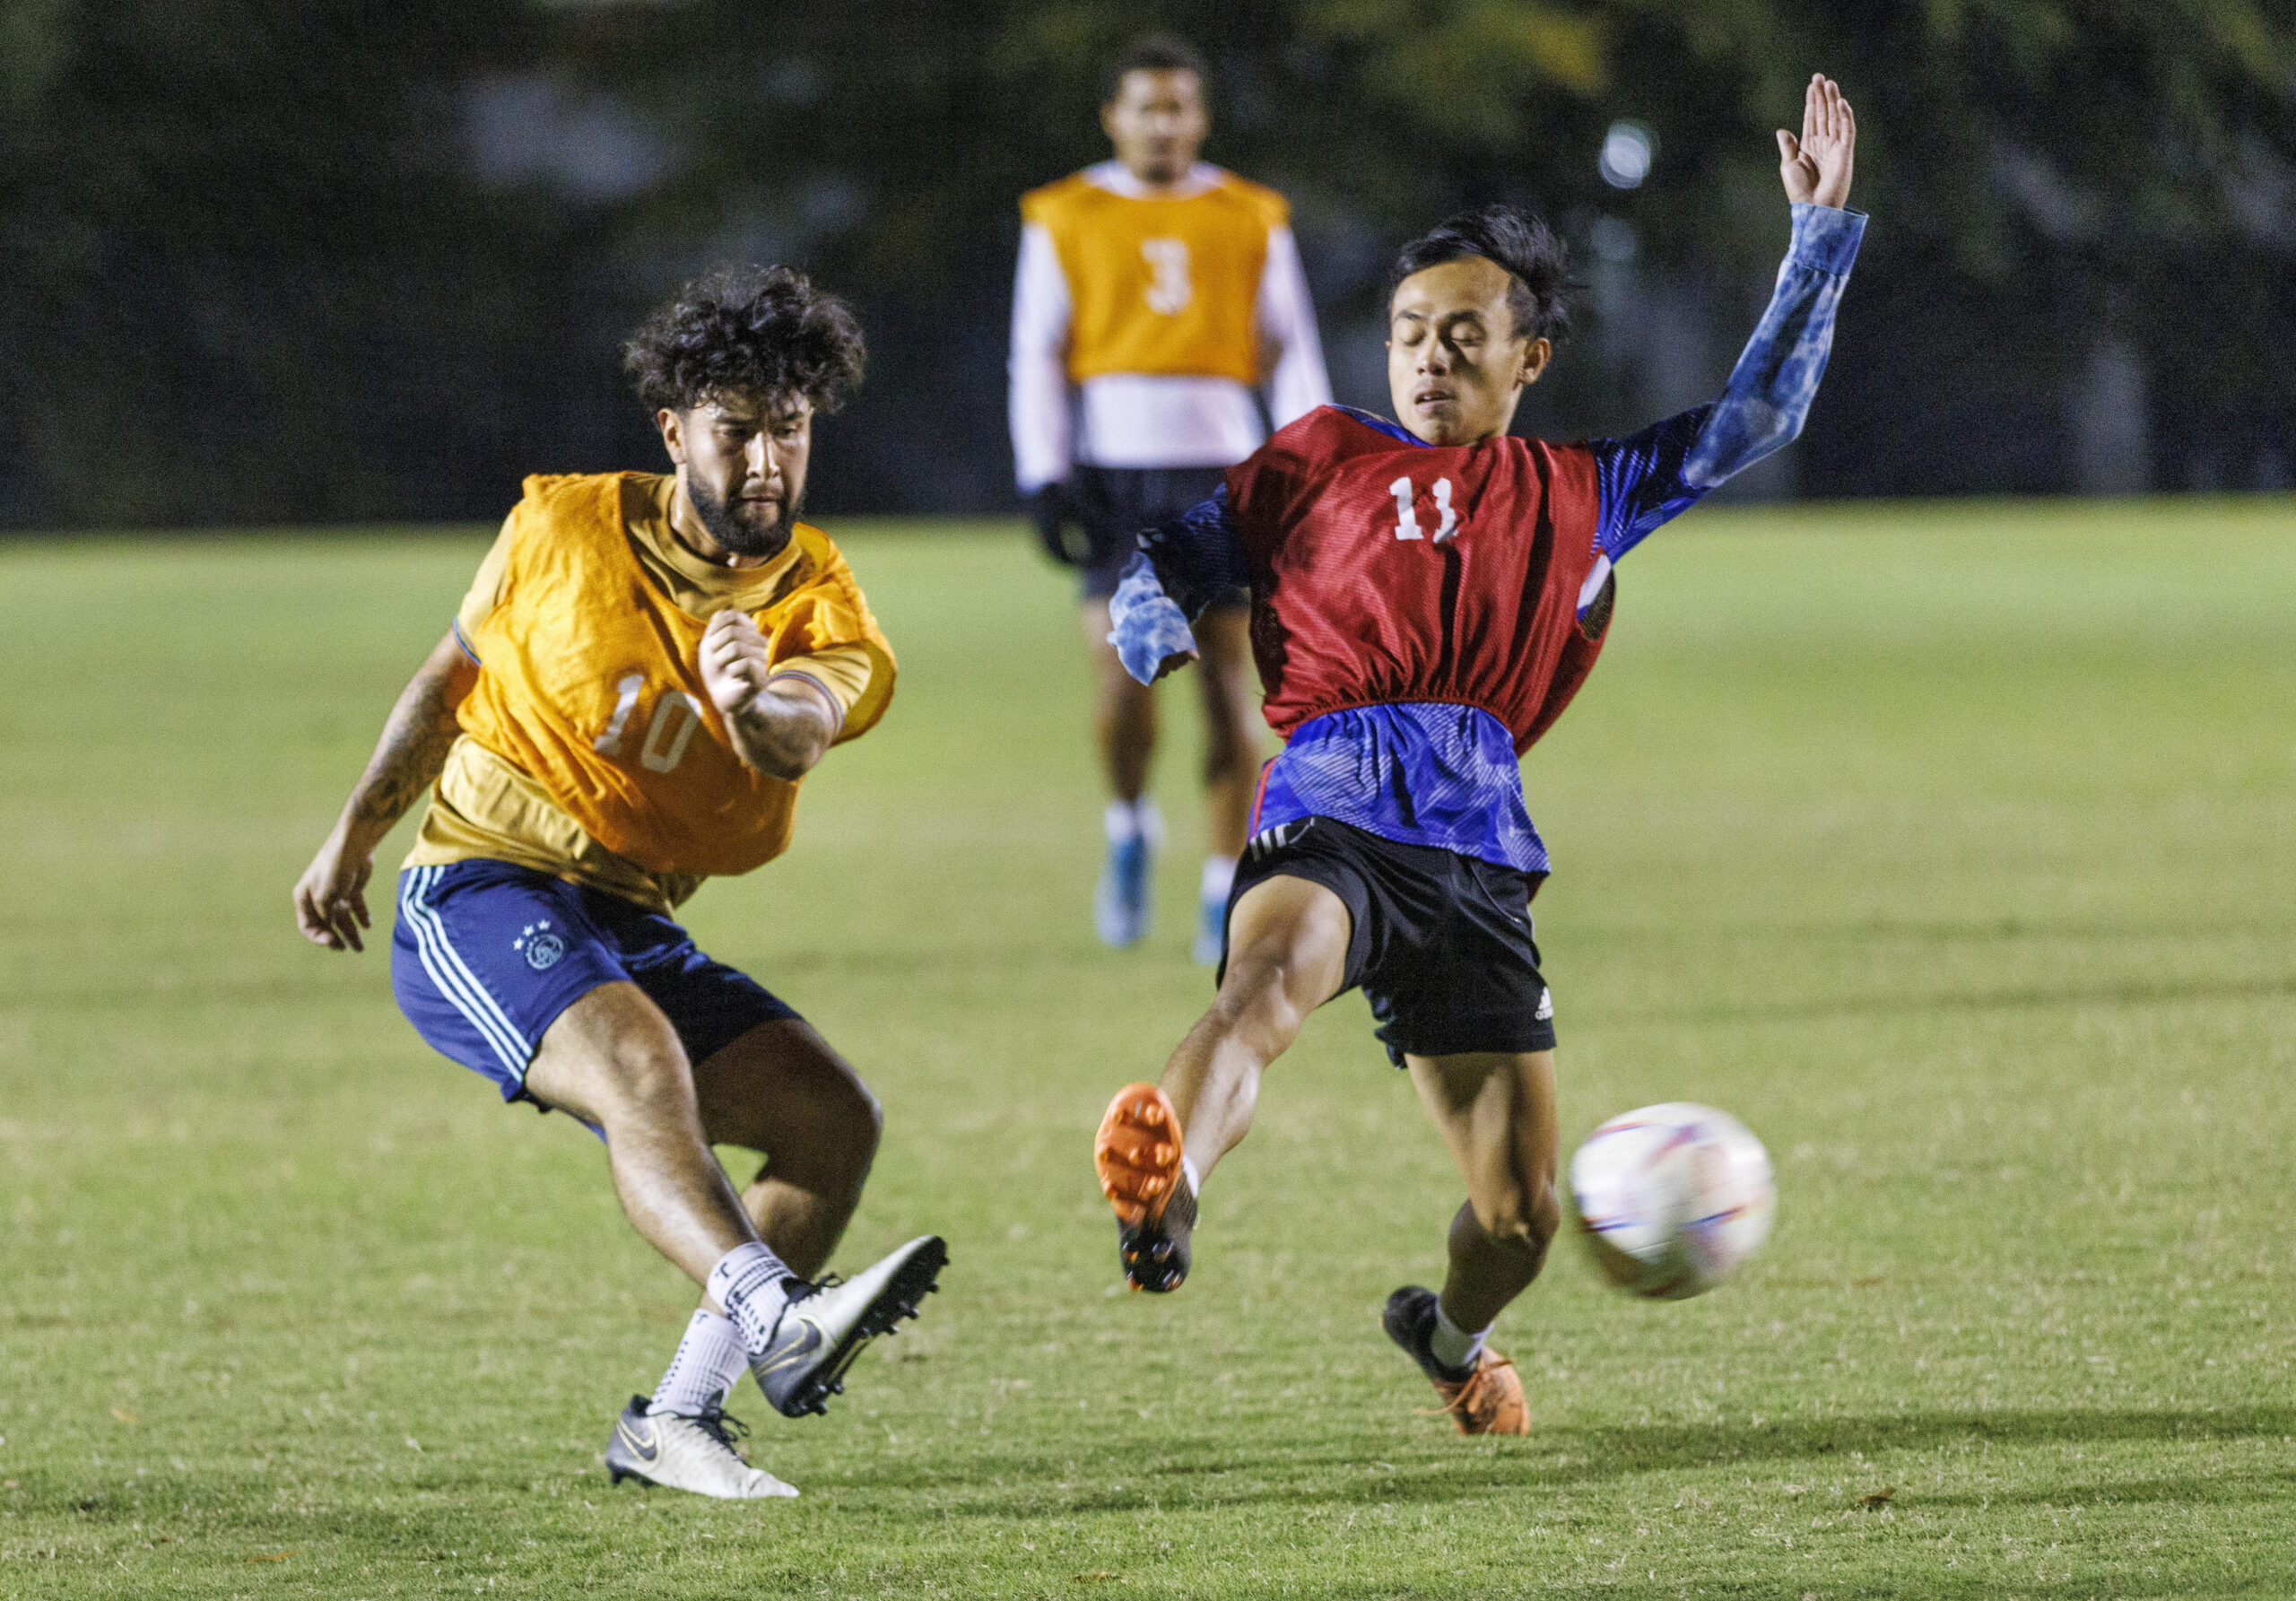 Intramural soccer players wearing red and yellow bibs fight for the ball